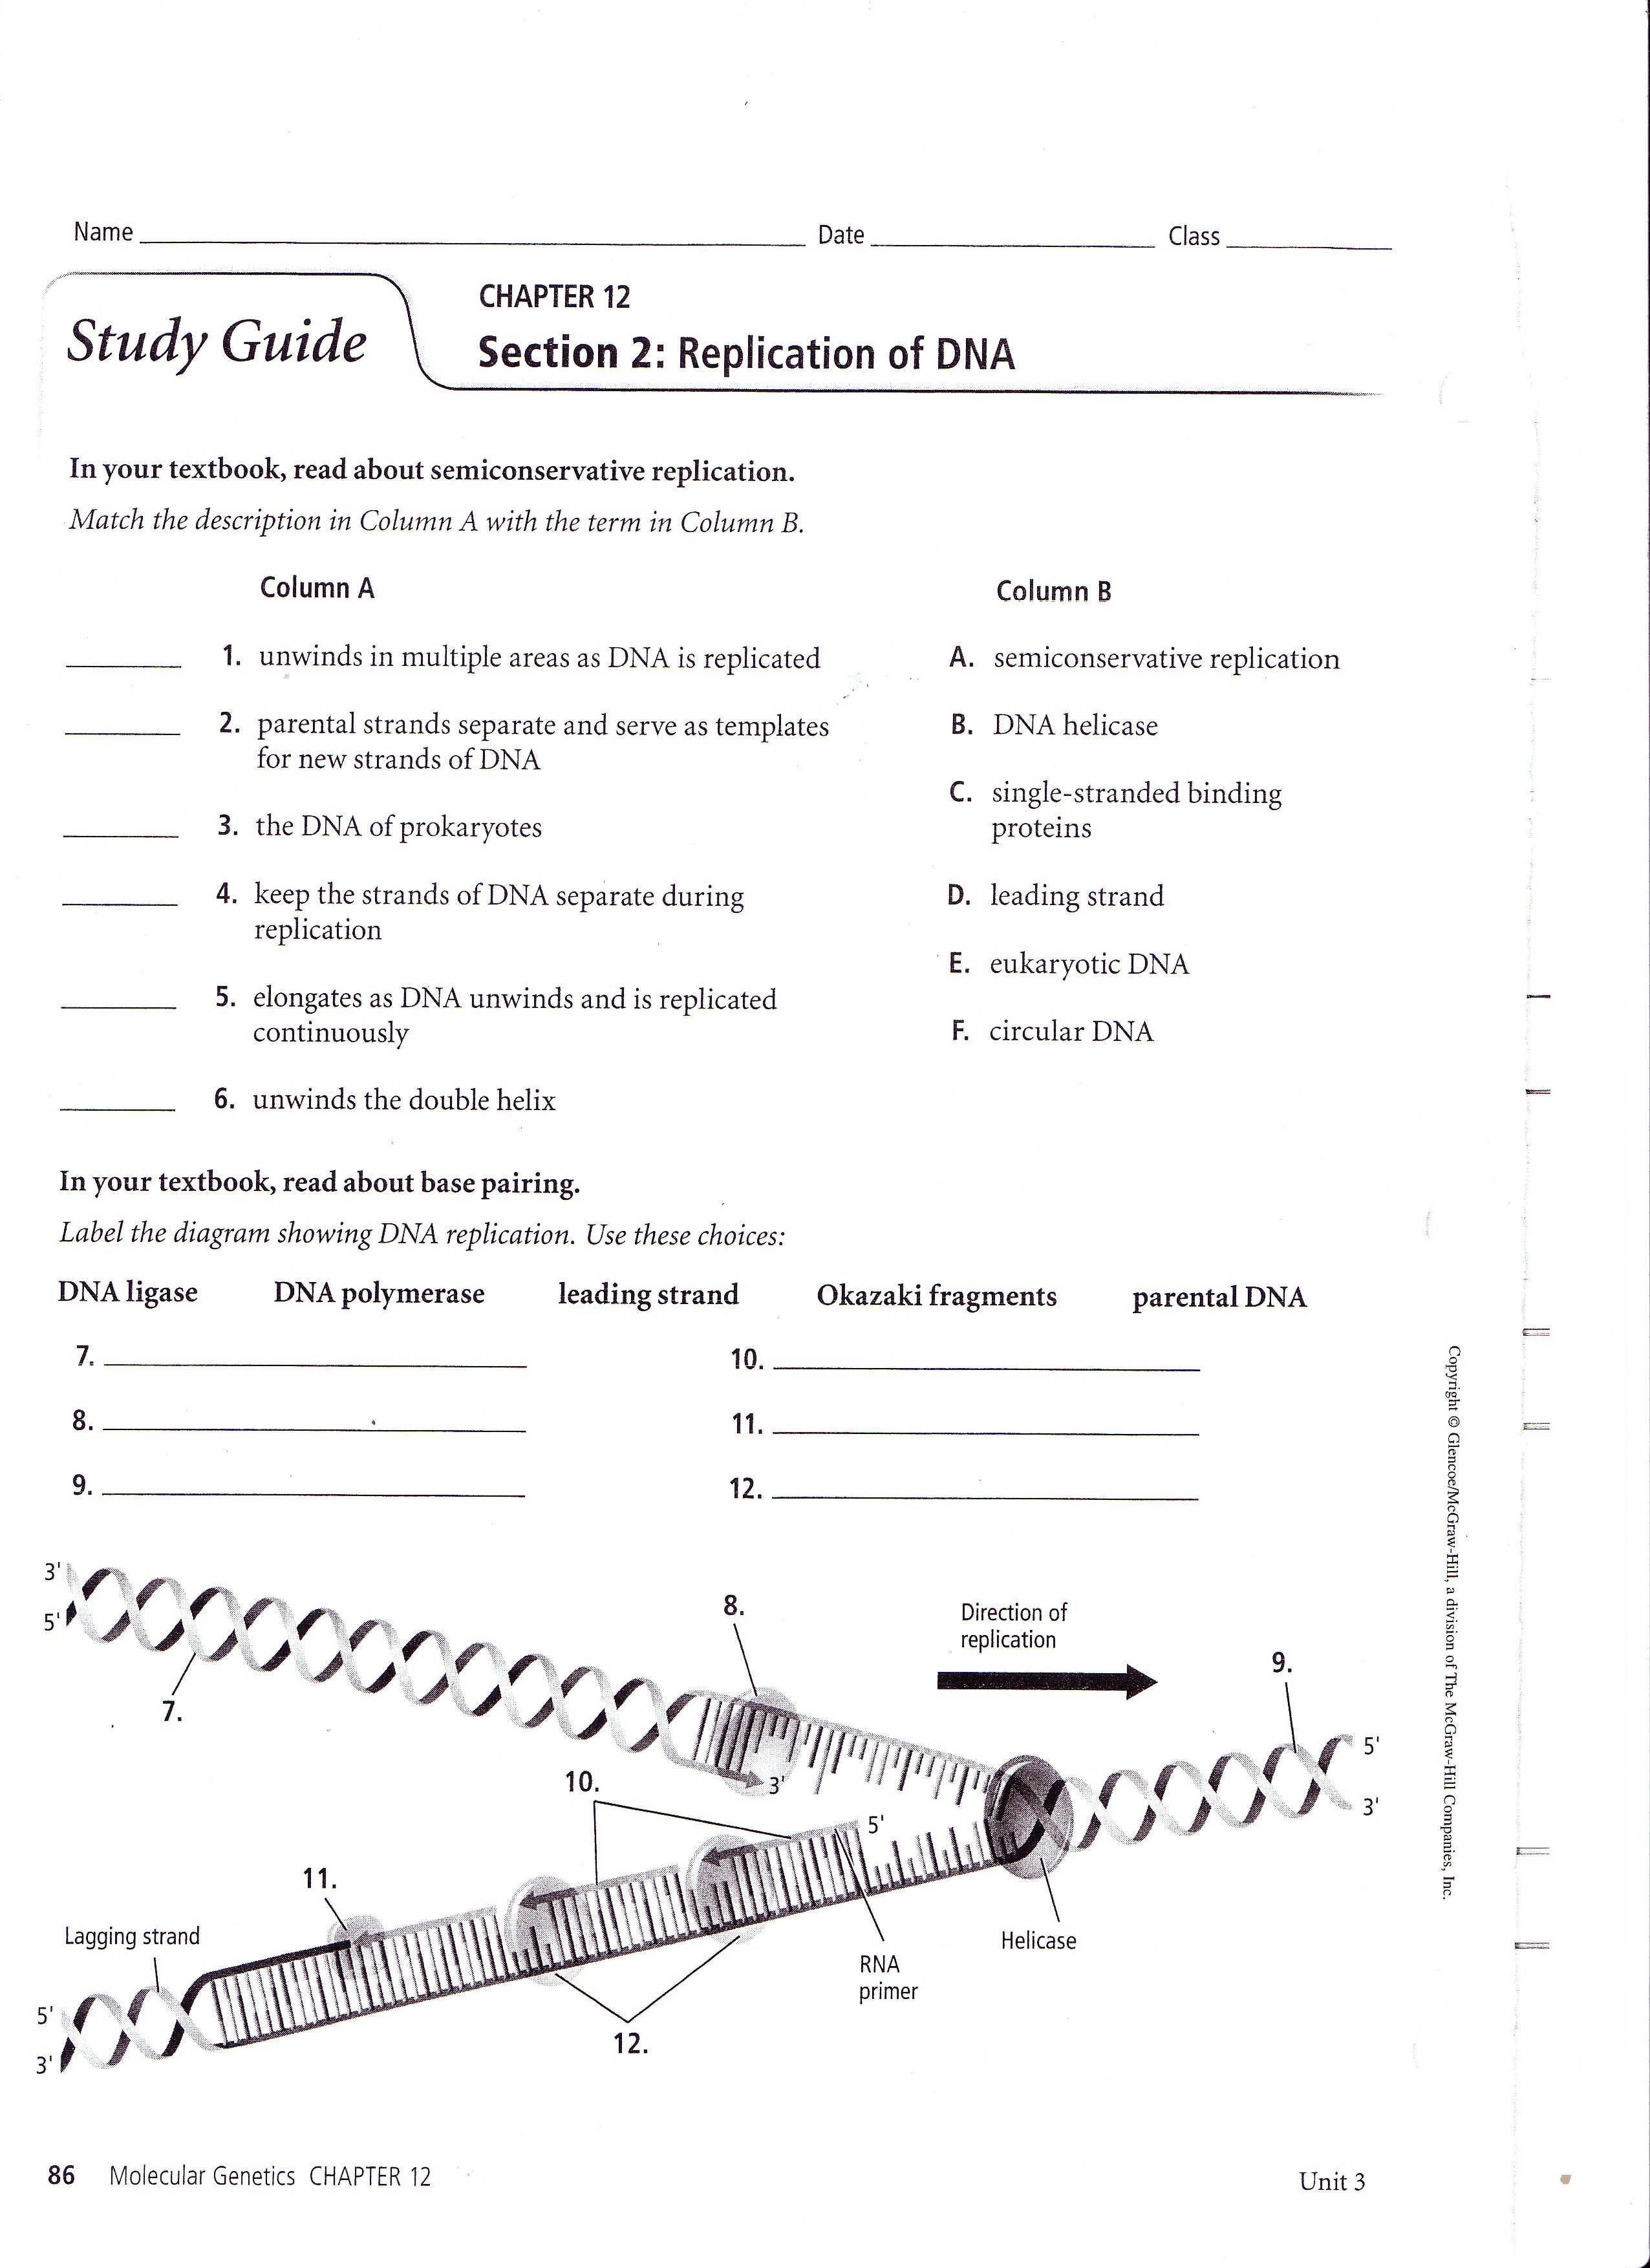 Structure Of Dna And Replication Worksheet Answers Slide Share